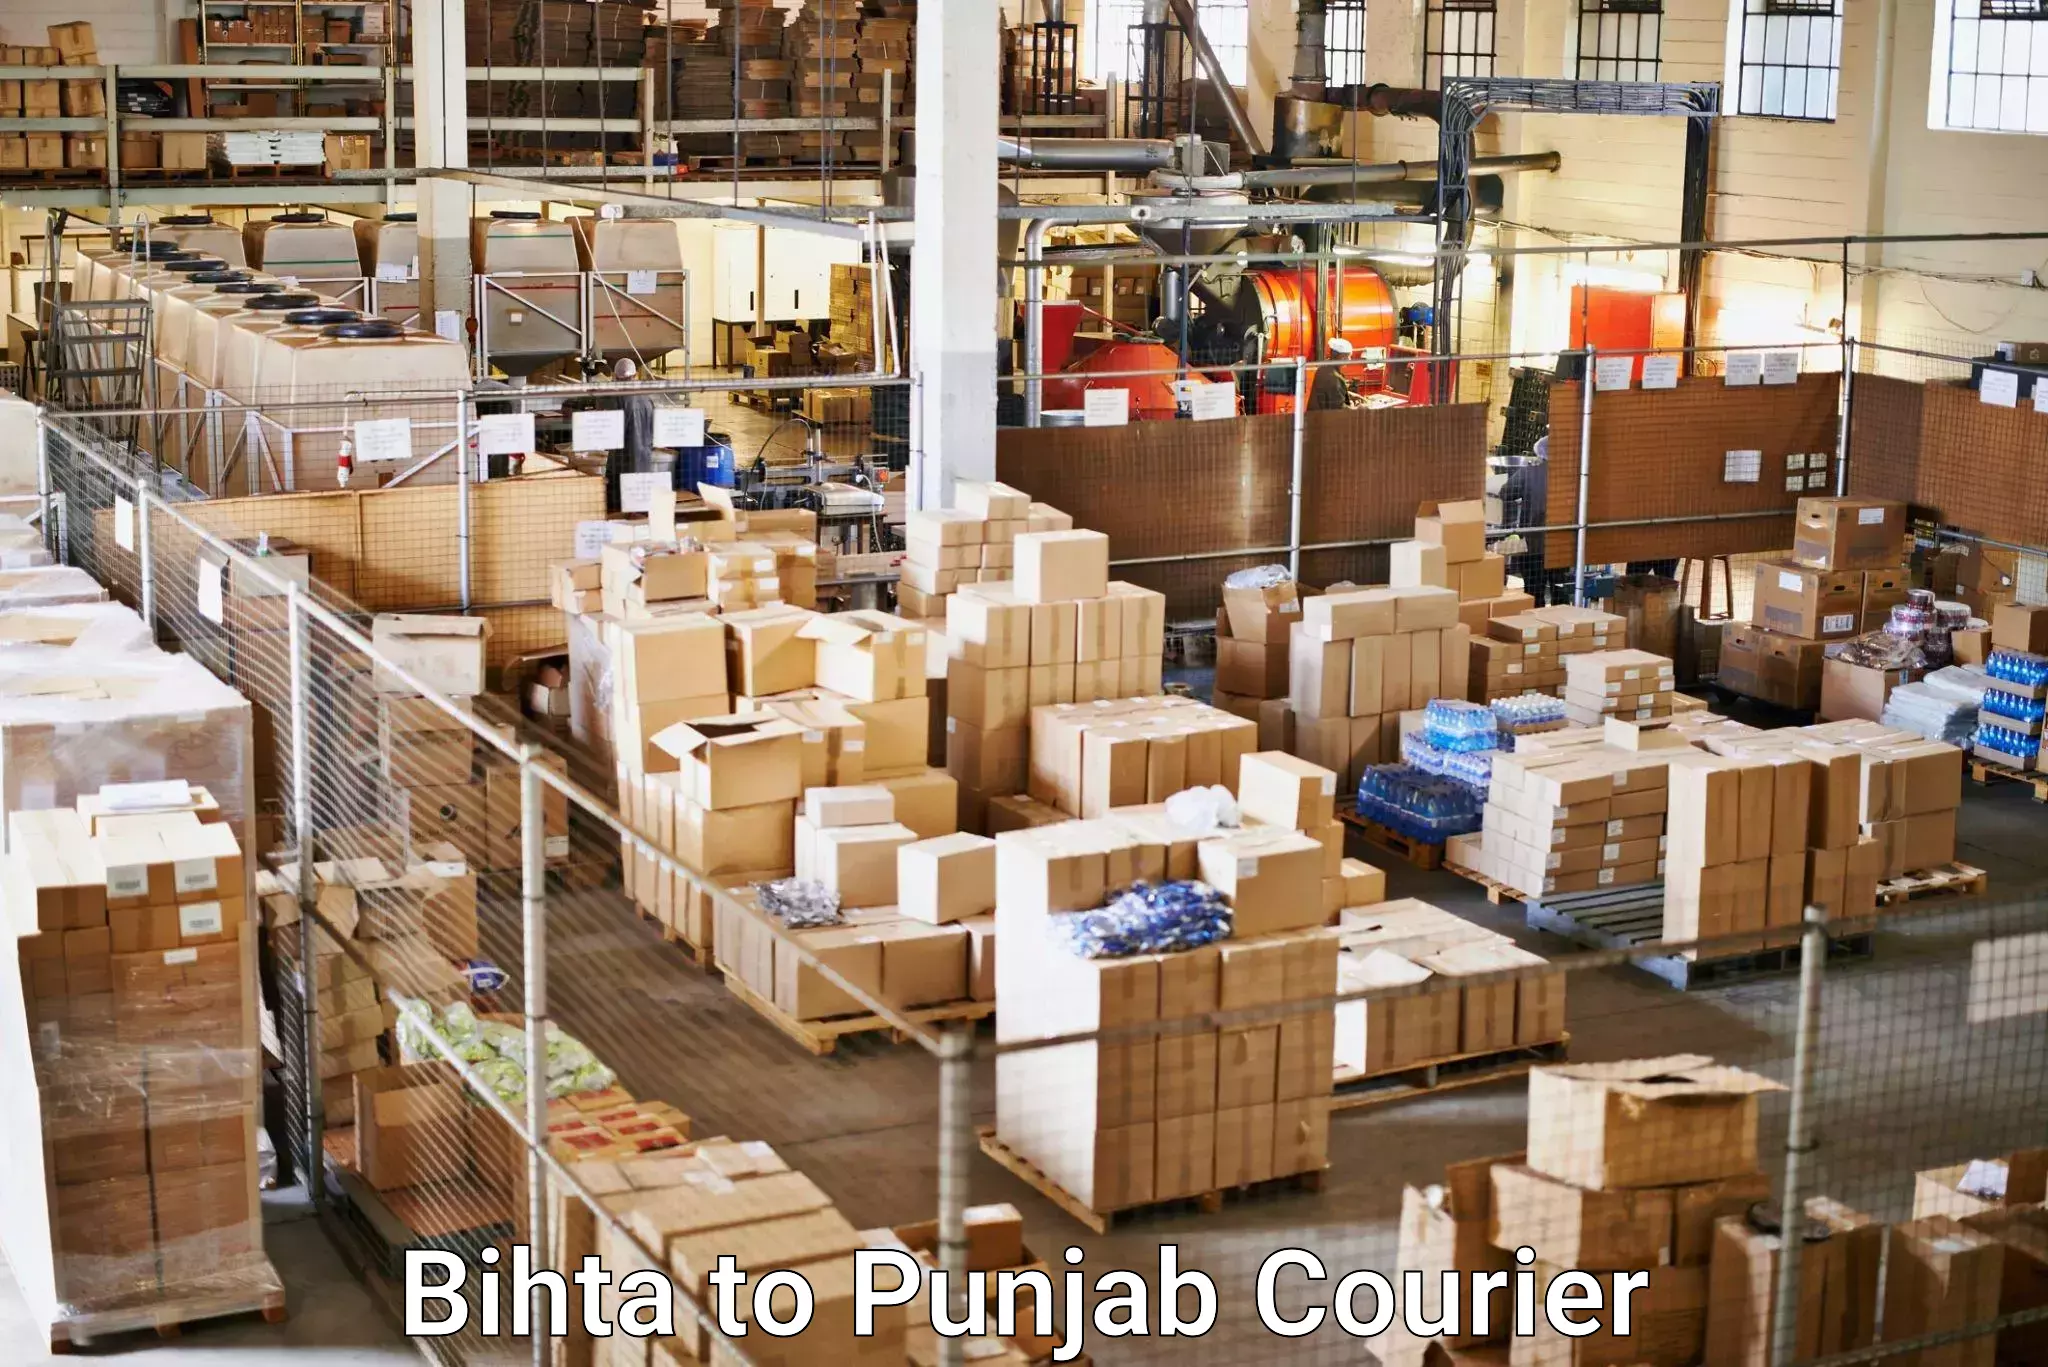 Secure shipping methods Bihta to Mohali